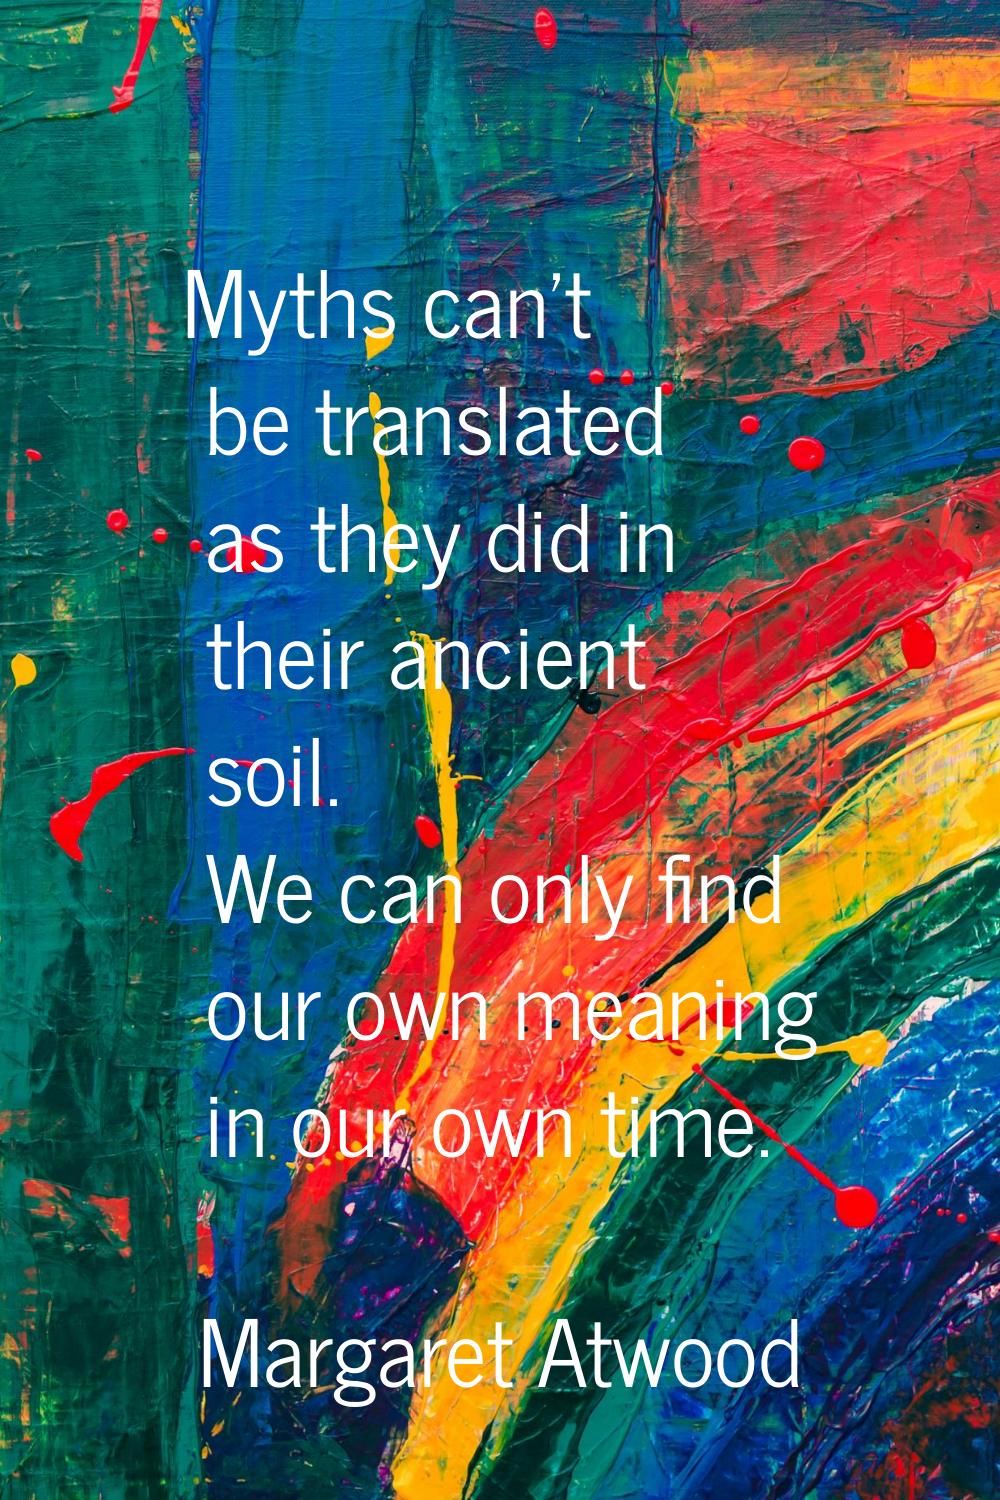 Myths can't be translated as they did in their ancient soil. We can only find our own meaning in ou